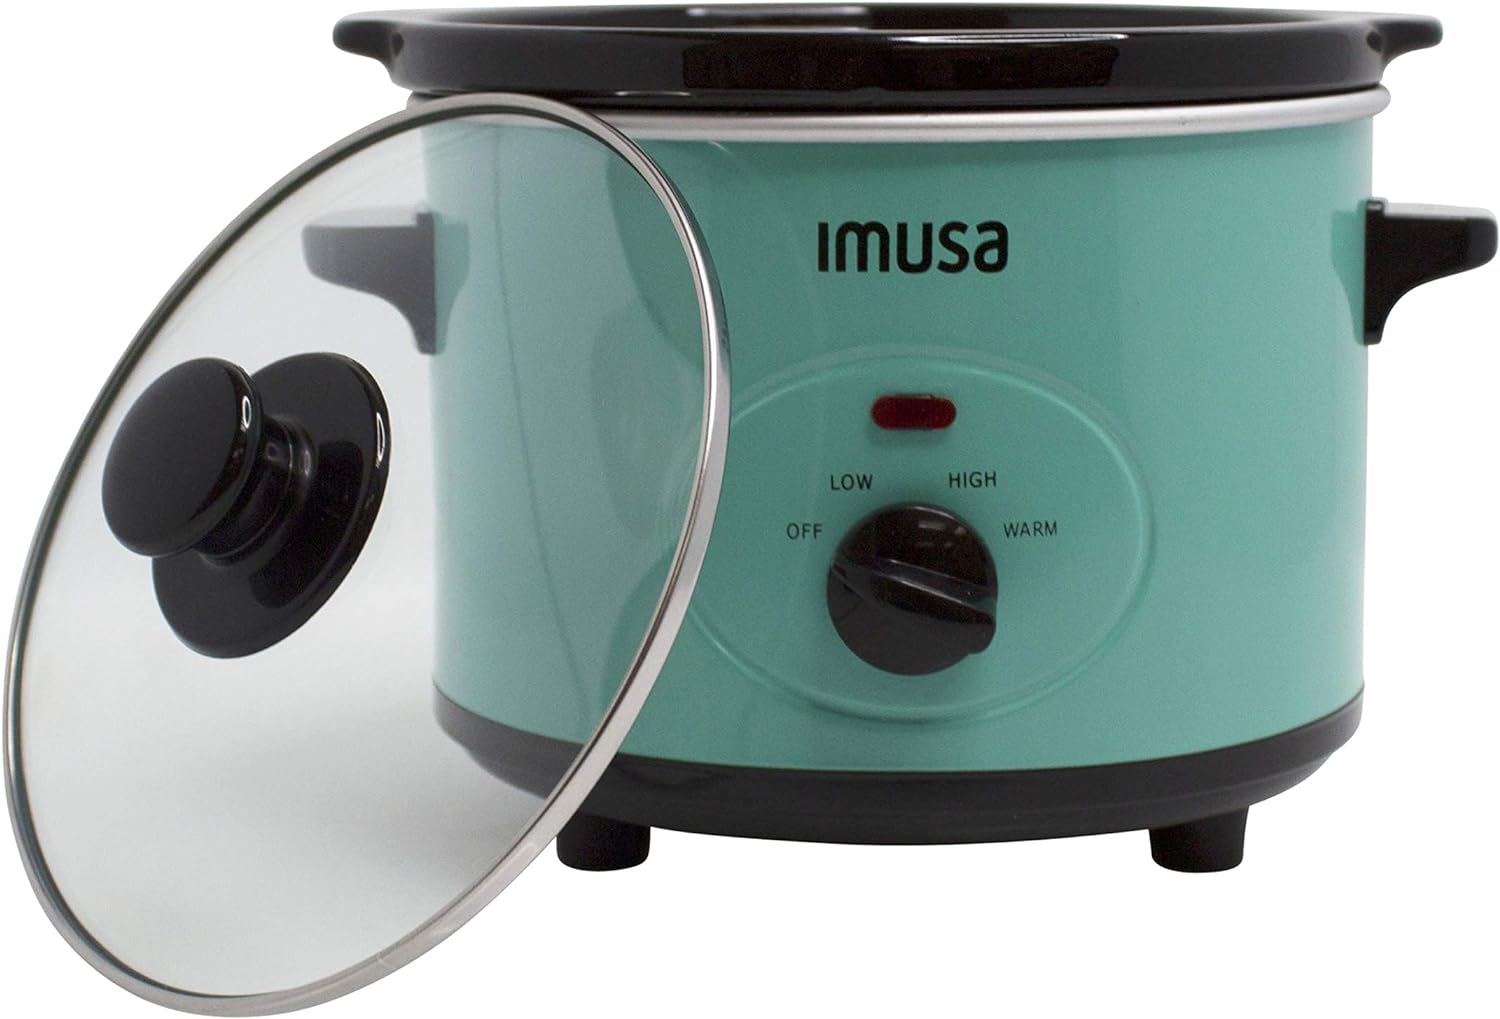 IMUSA GAU-80113T 1.5 Quart Teal Slow Cooker with Glass Lid